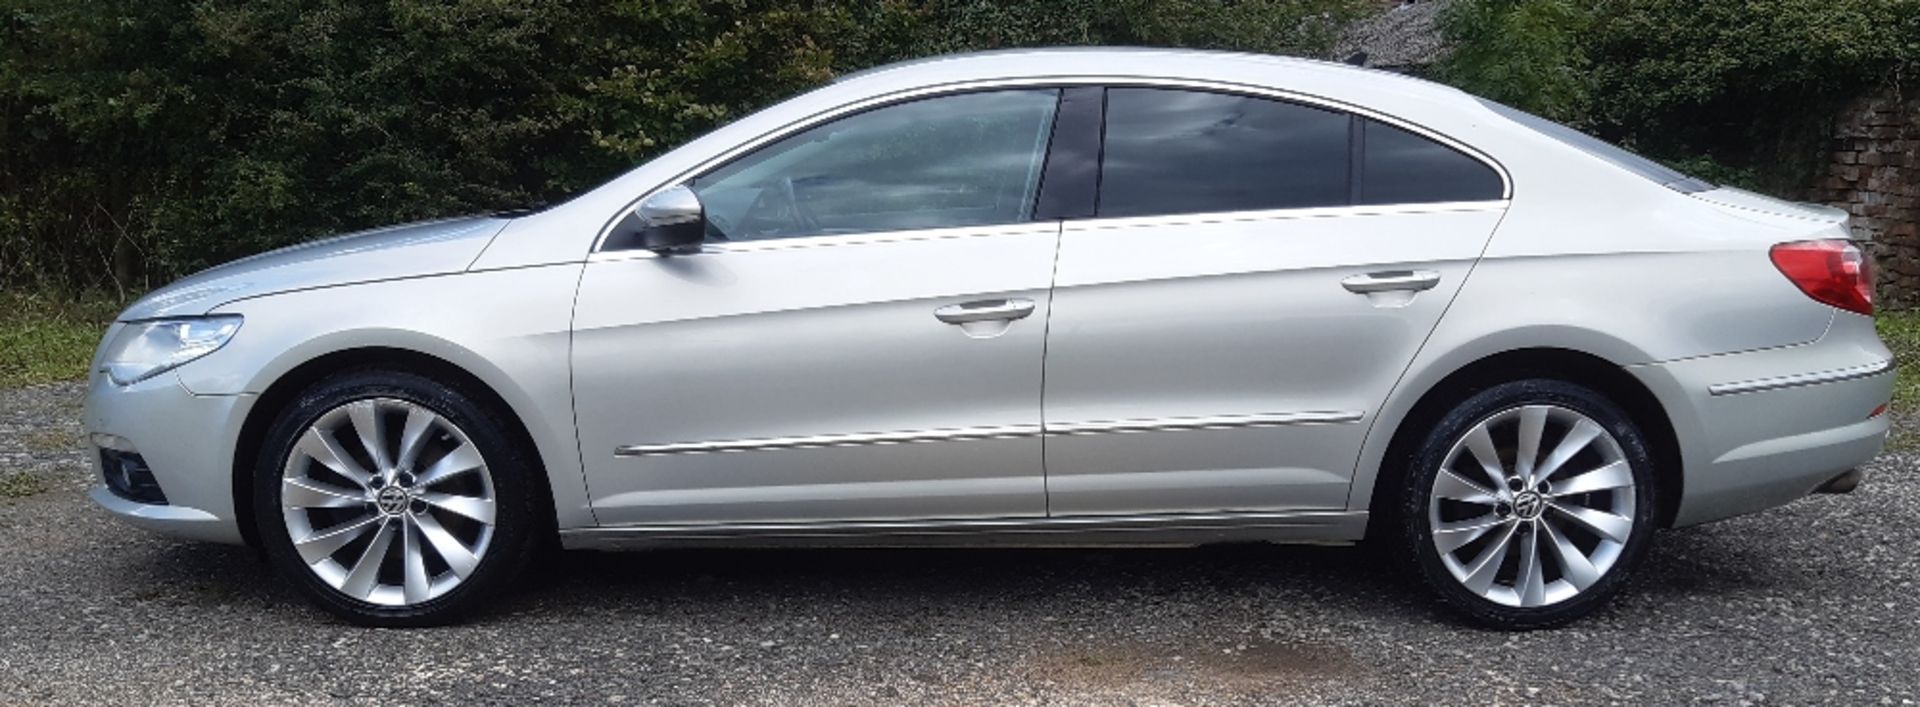 Volkswagen Passet GT TDI 170 Coupe in Silver - Image 4 of 13